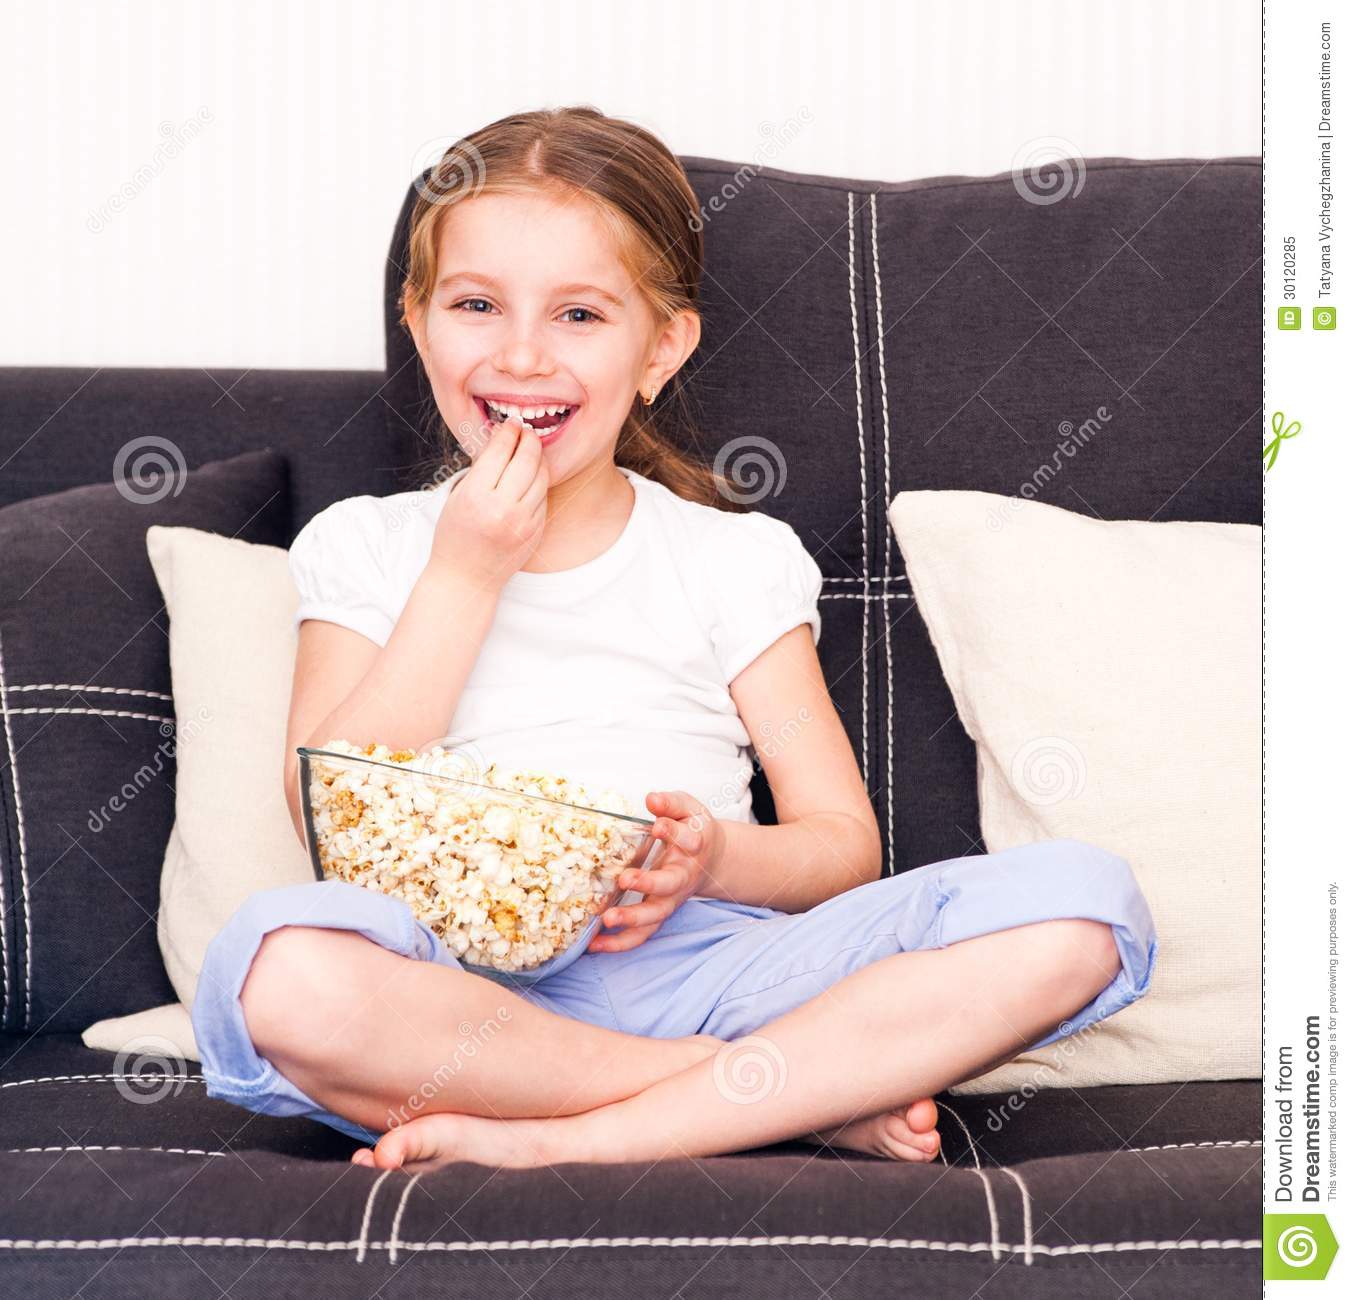 Little Girl Watching Tv Royalty Free Stock Photo   Image  30120285